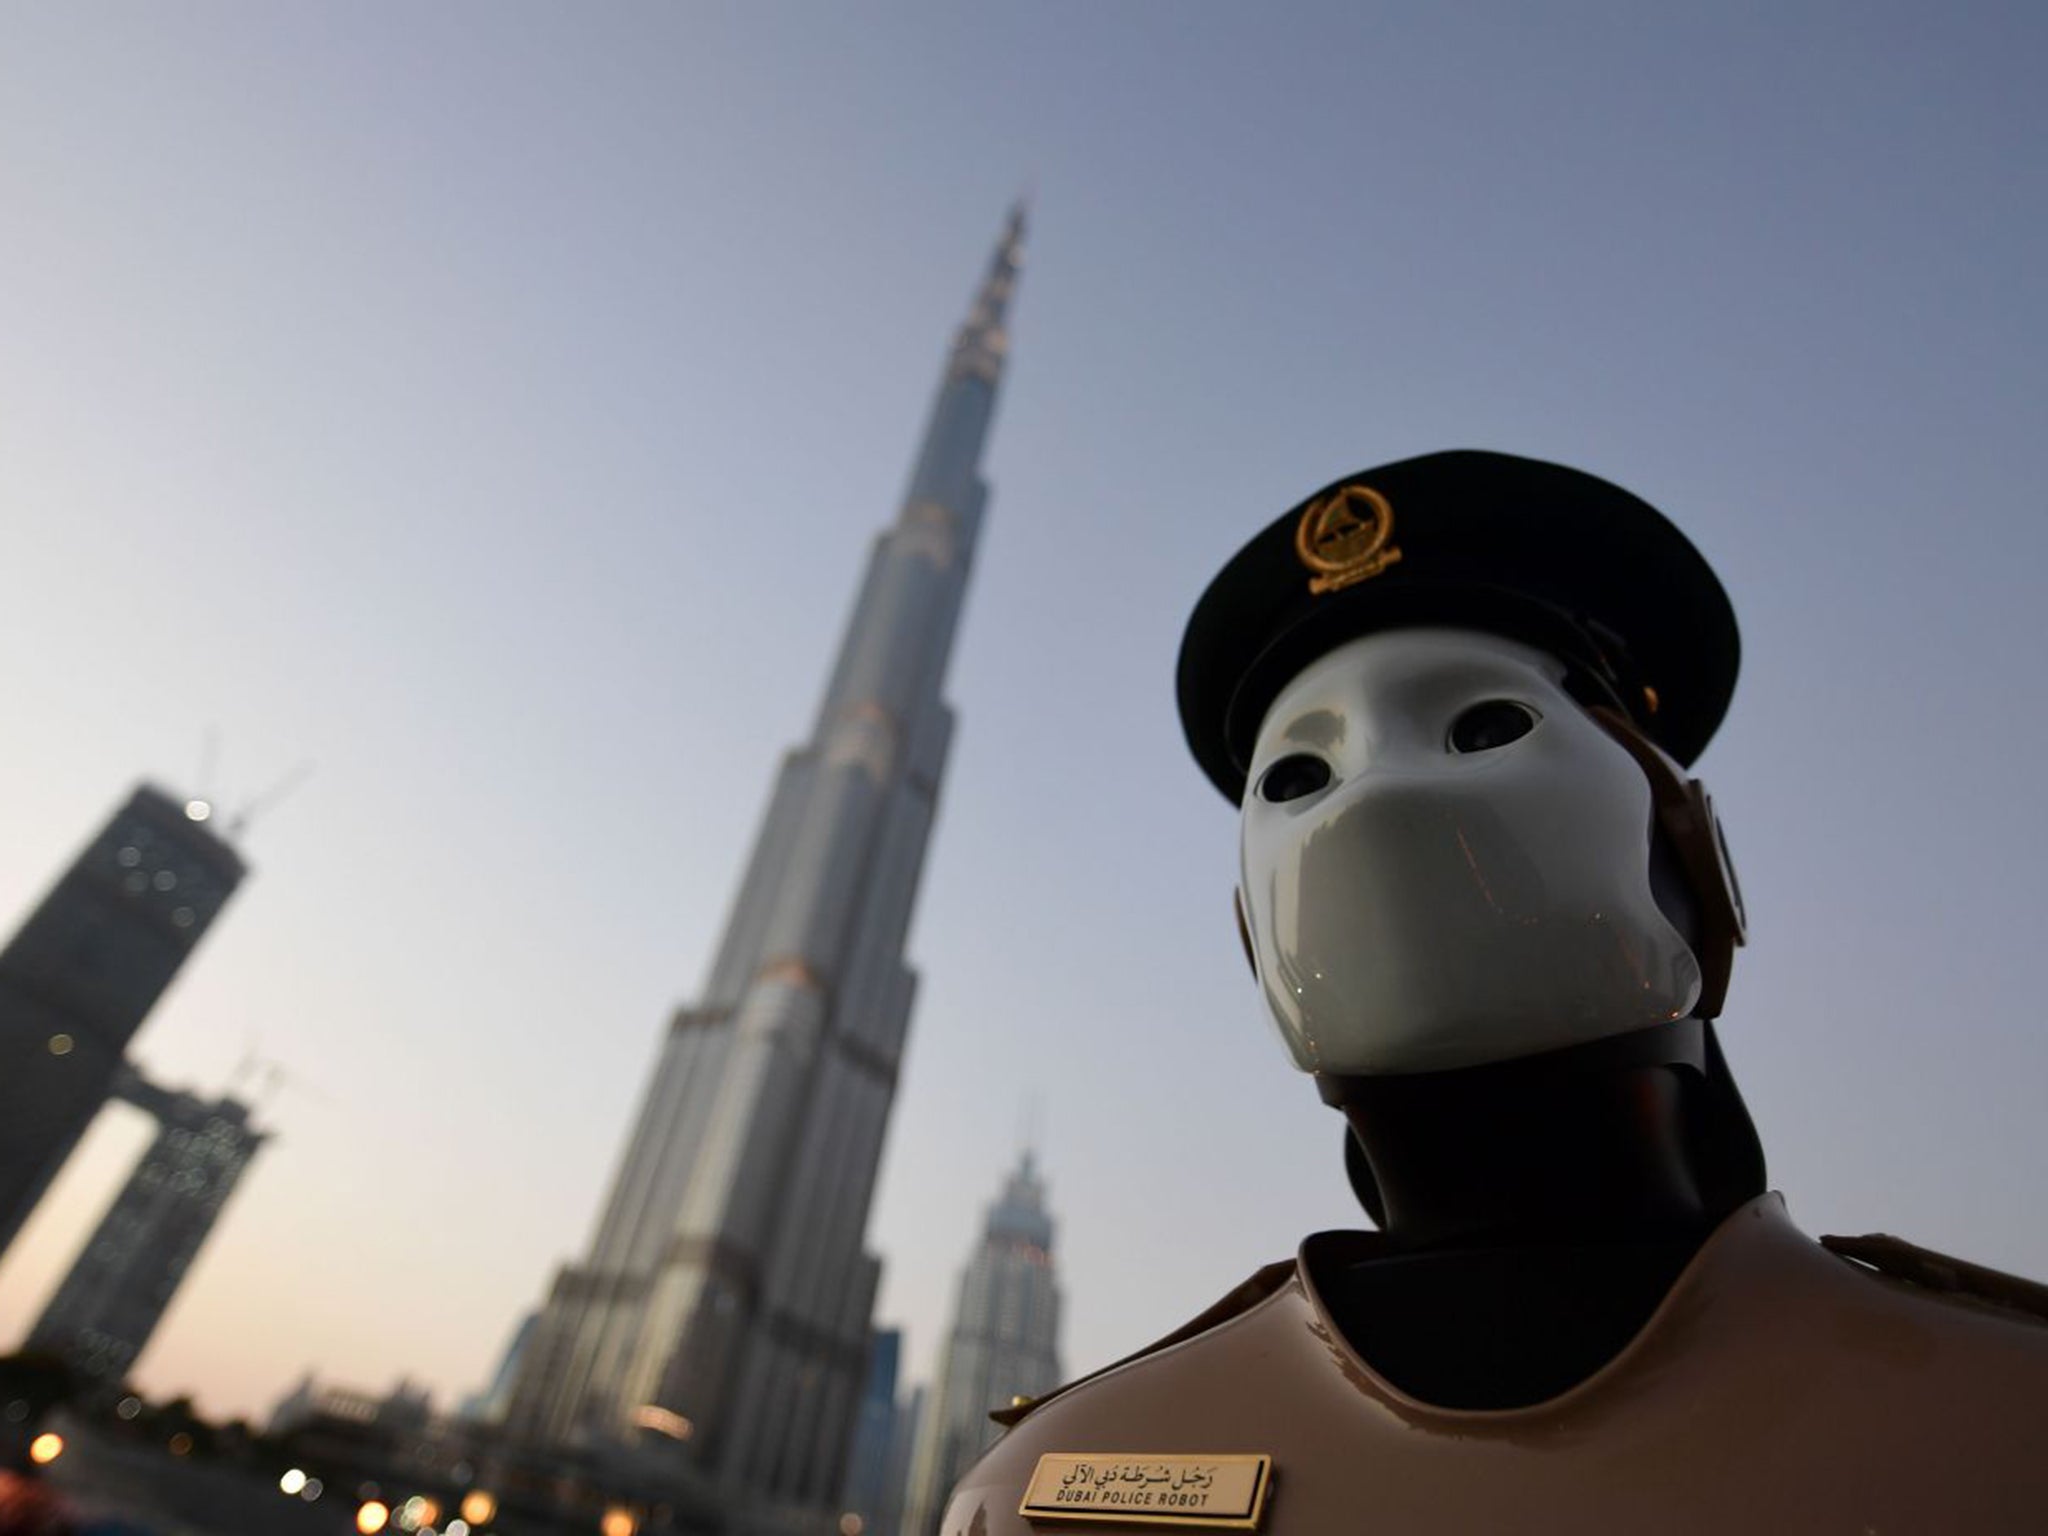 Automated police cars to start patrolling the streets of Dubai before the end of the year - The Independent